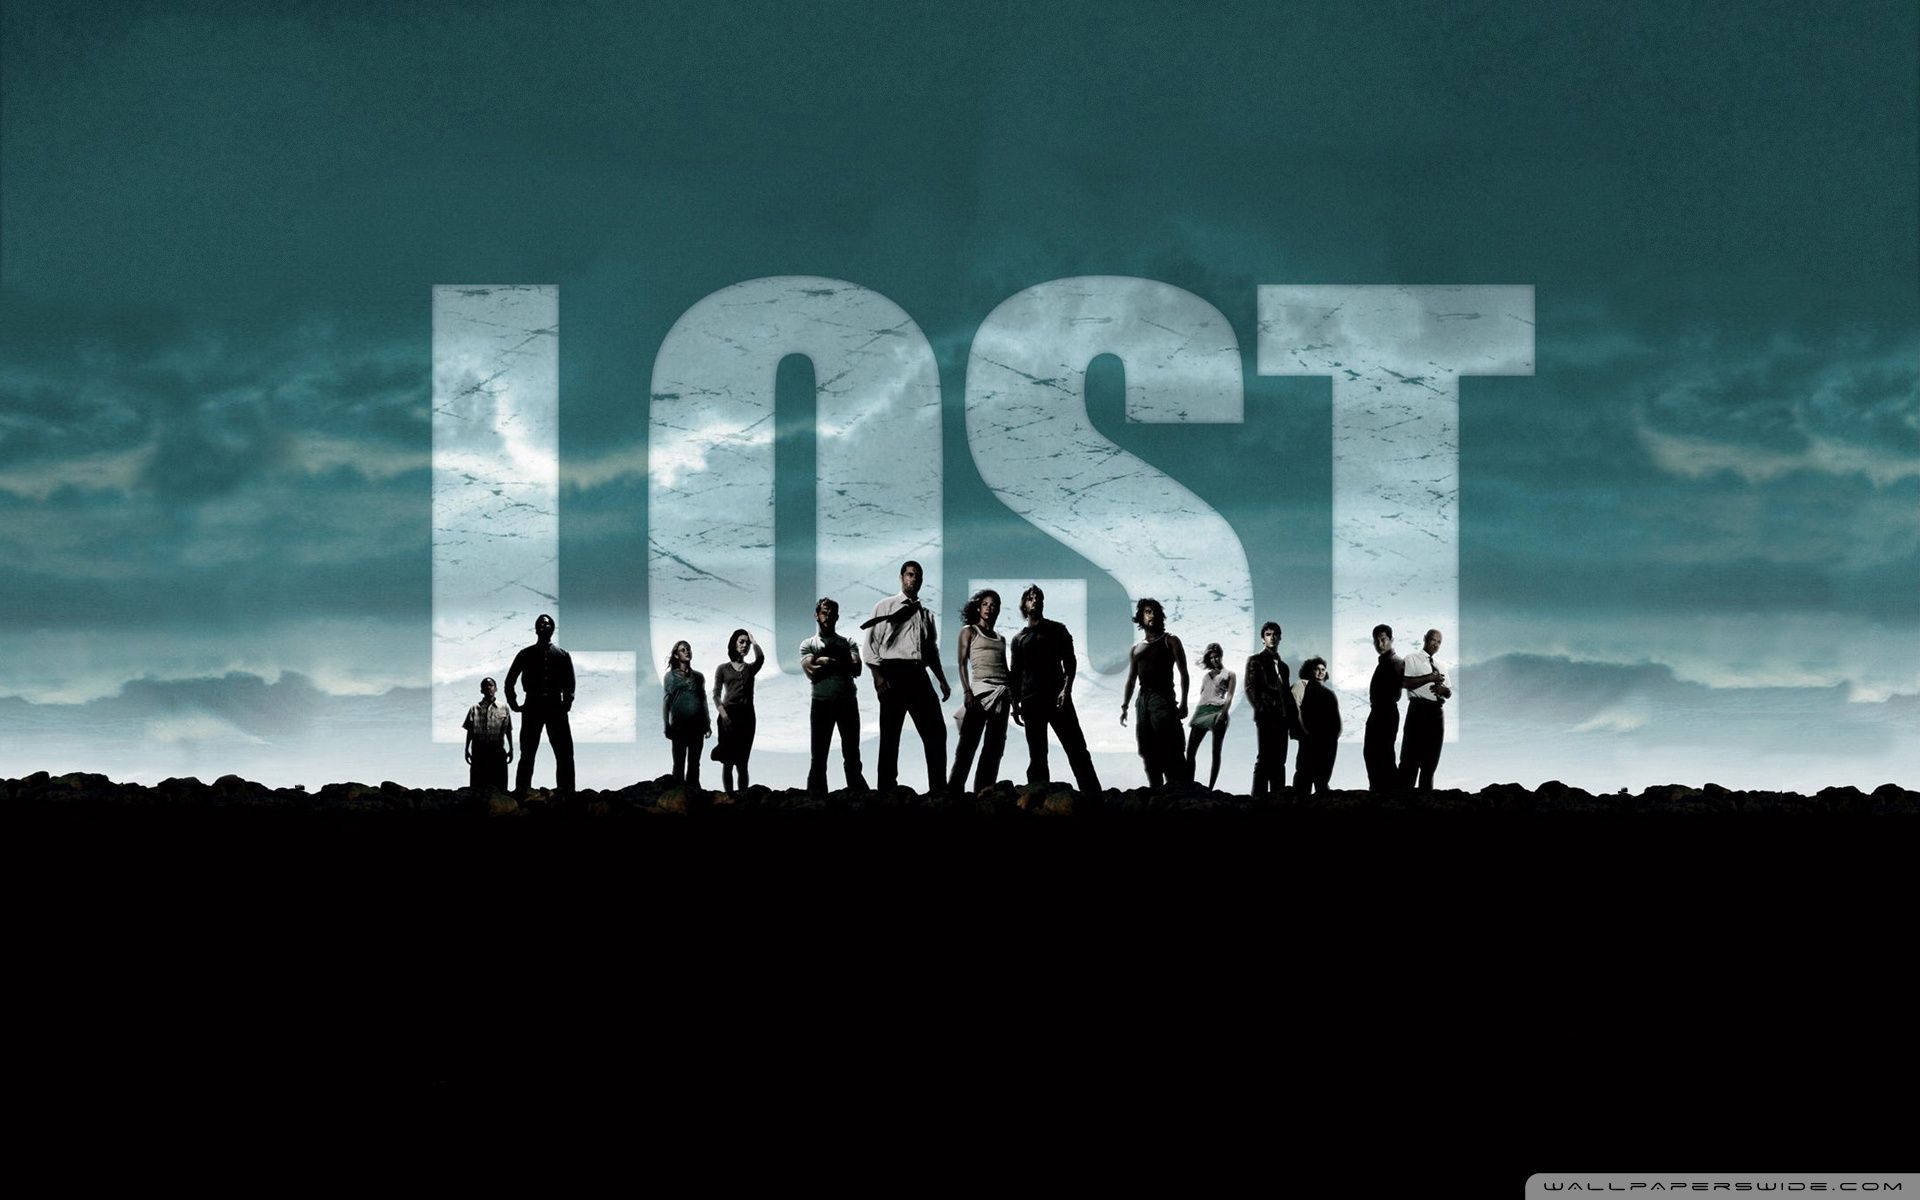 Lost Wallpapers